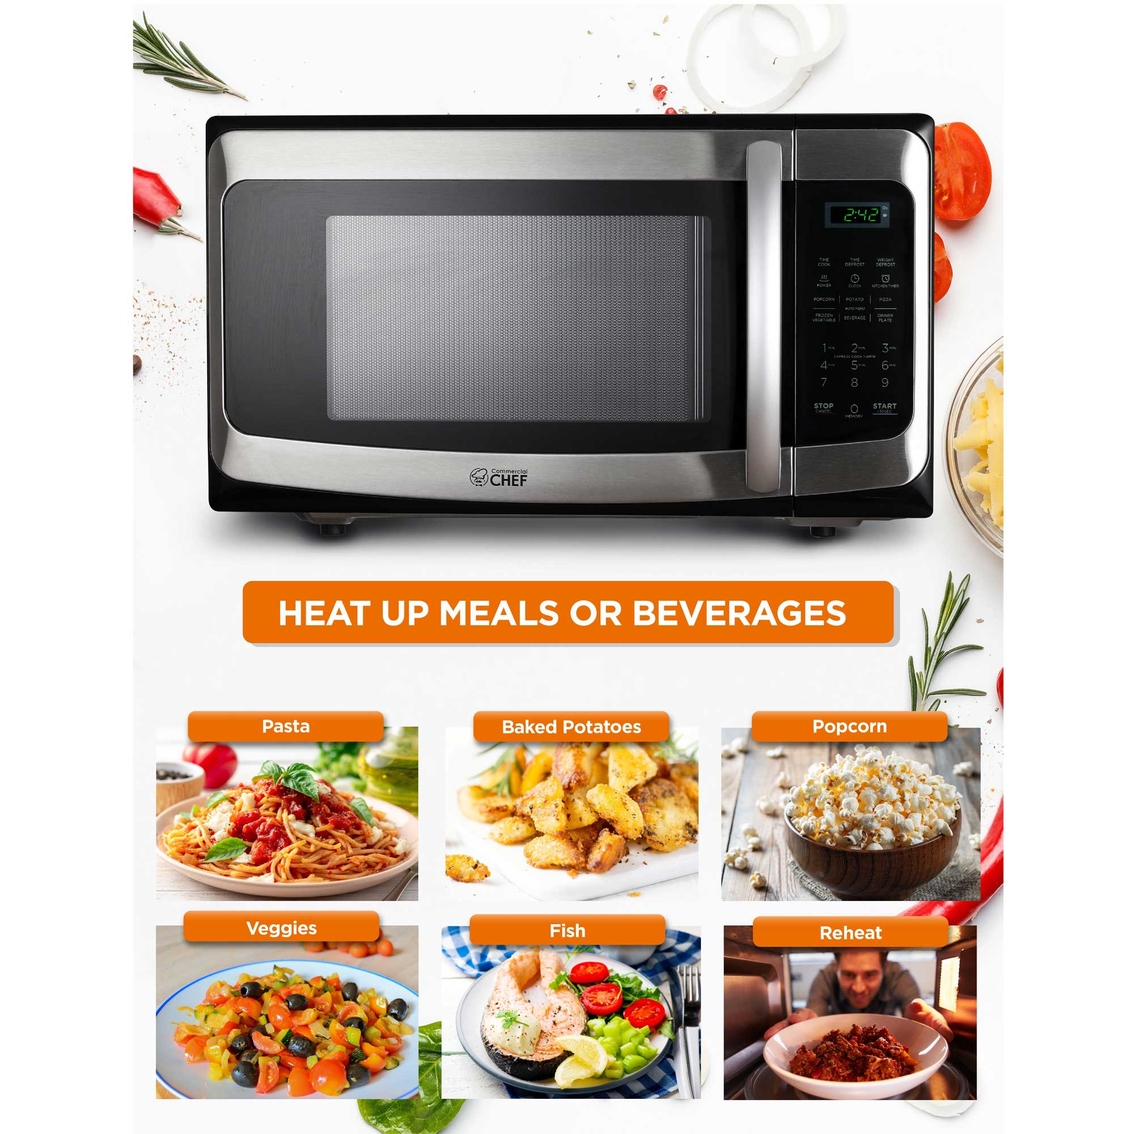 Commercial Chef 1.1 cu. ft. Countertop Microwave Oven - Image 2 of 7